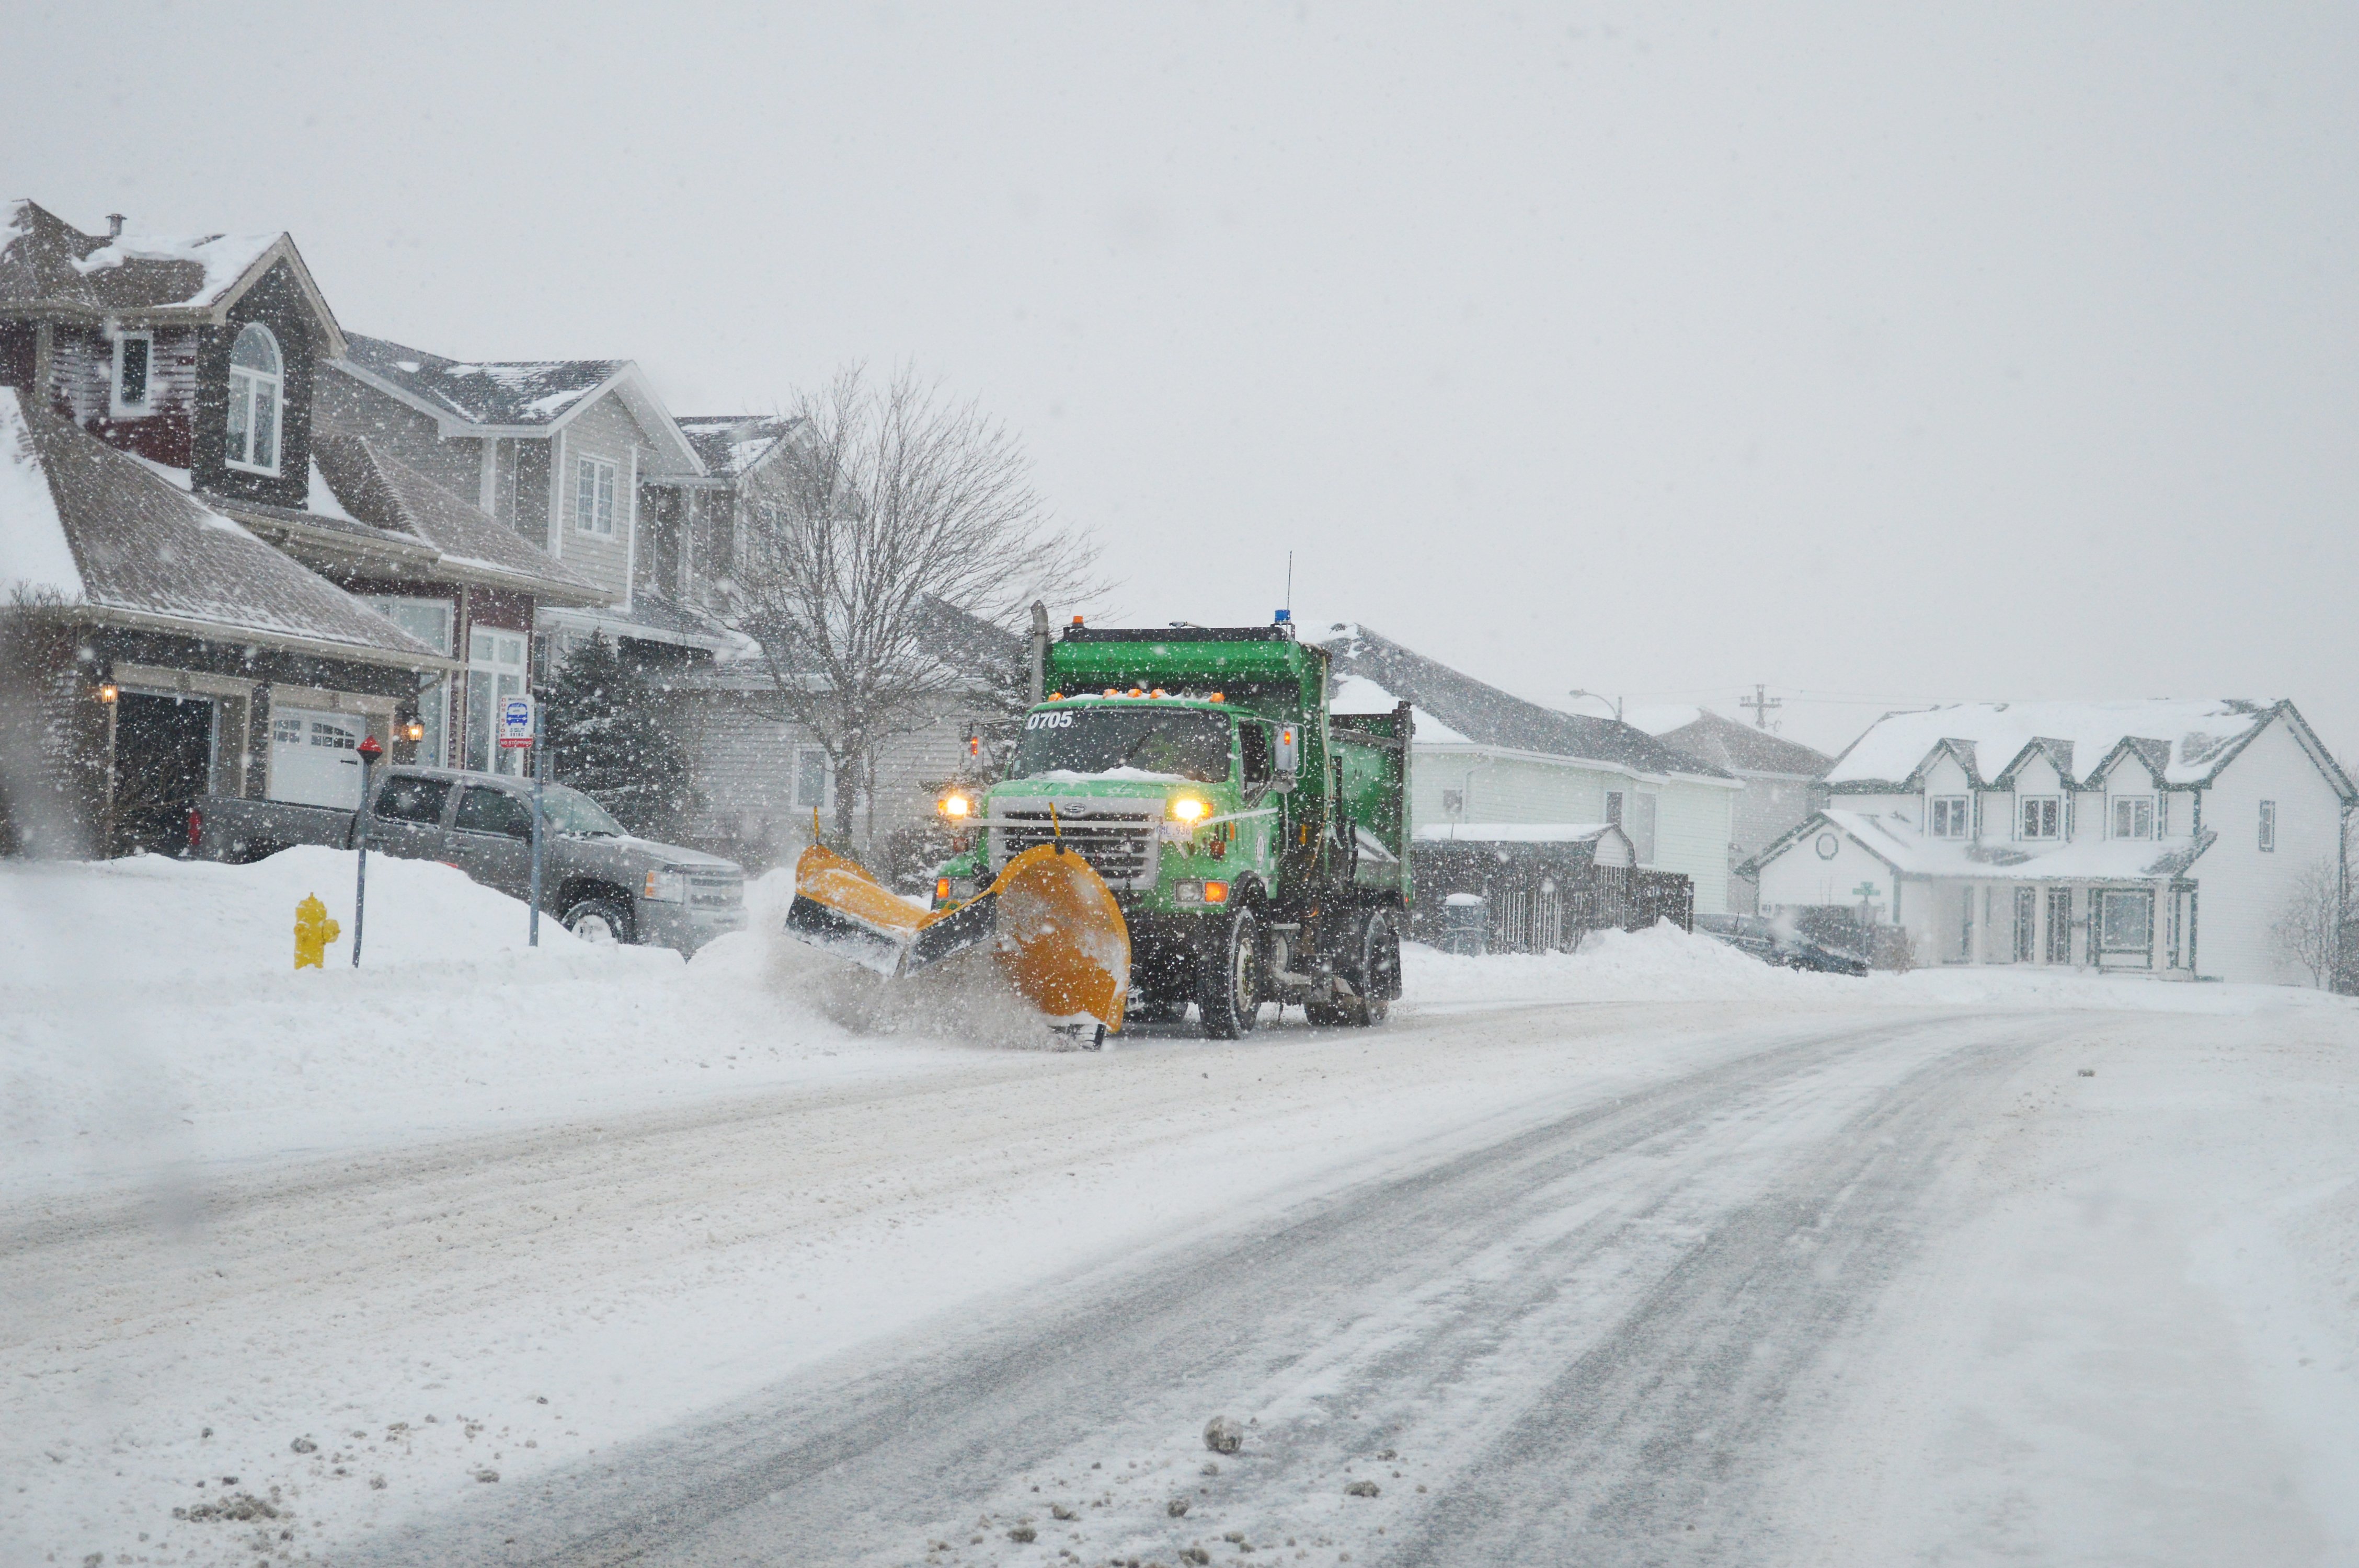 A snow covered city street, with homes in the background. A green snow plow with a yellow blade is on the left of the image.